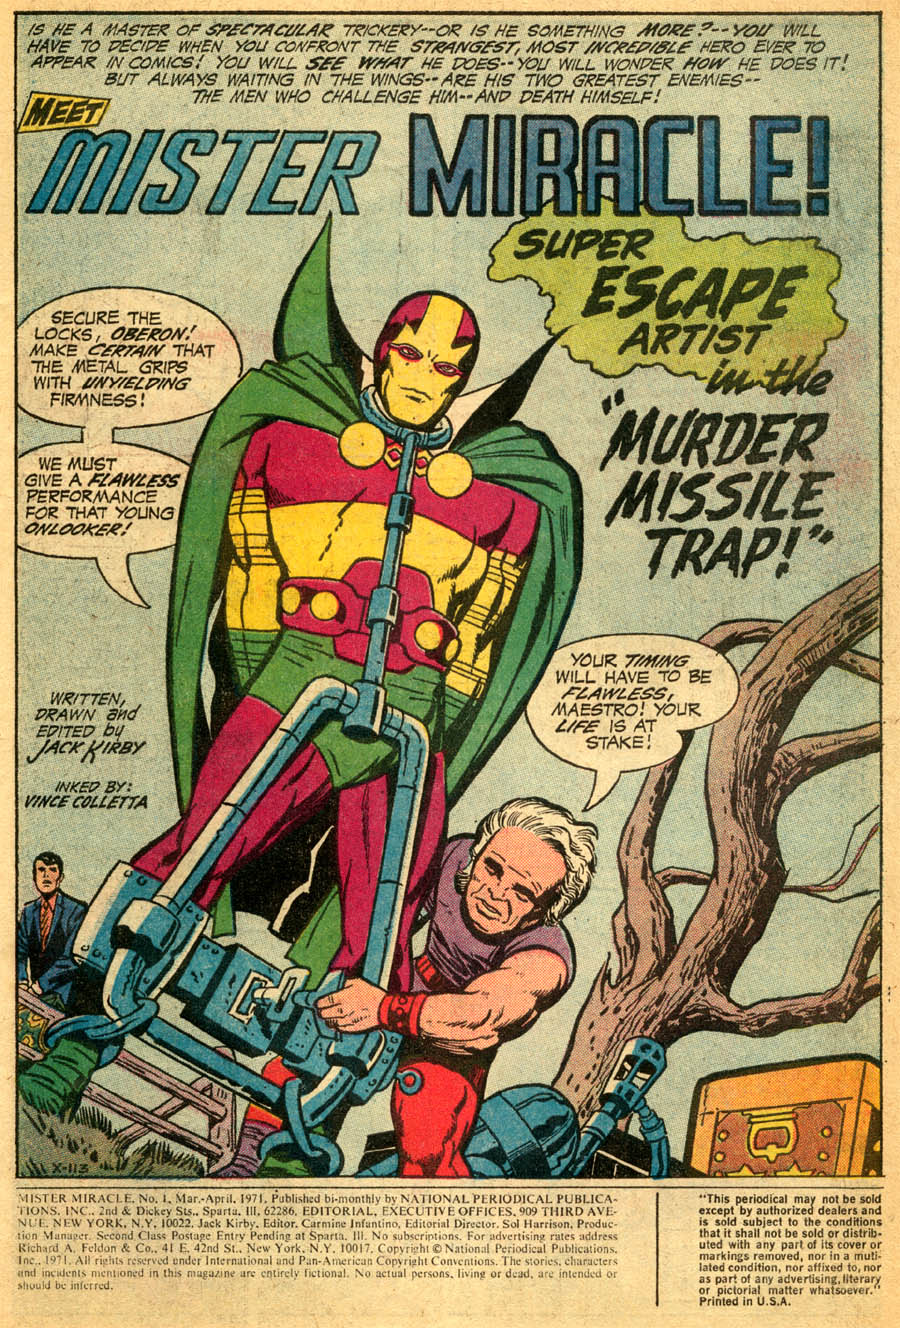 Mister Miracle by Jack Kirby (New Edition) by Kirby, Jack